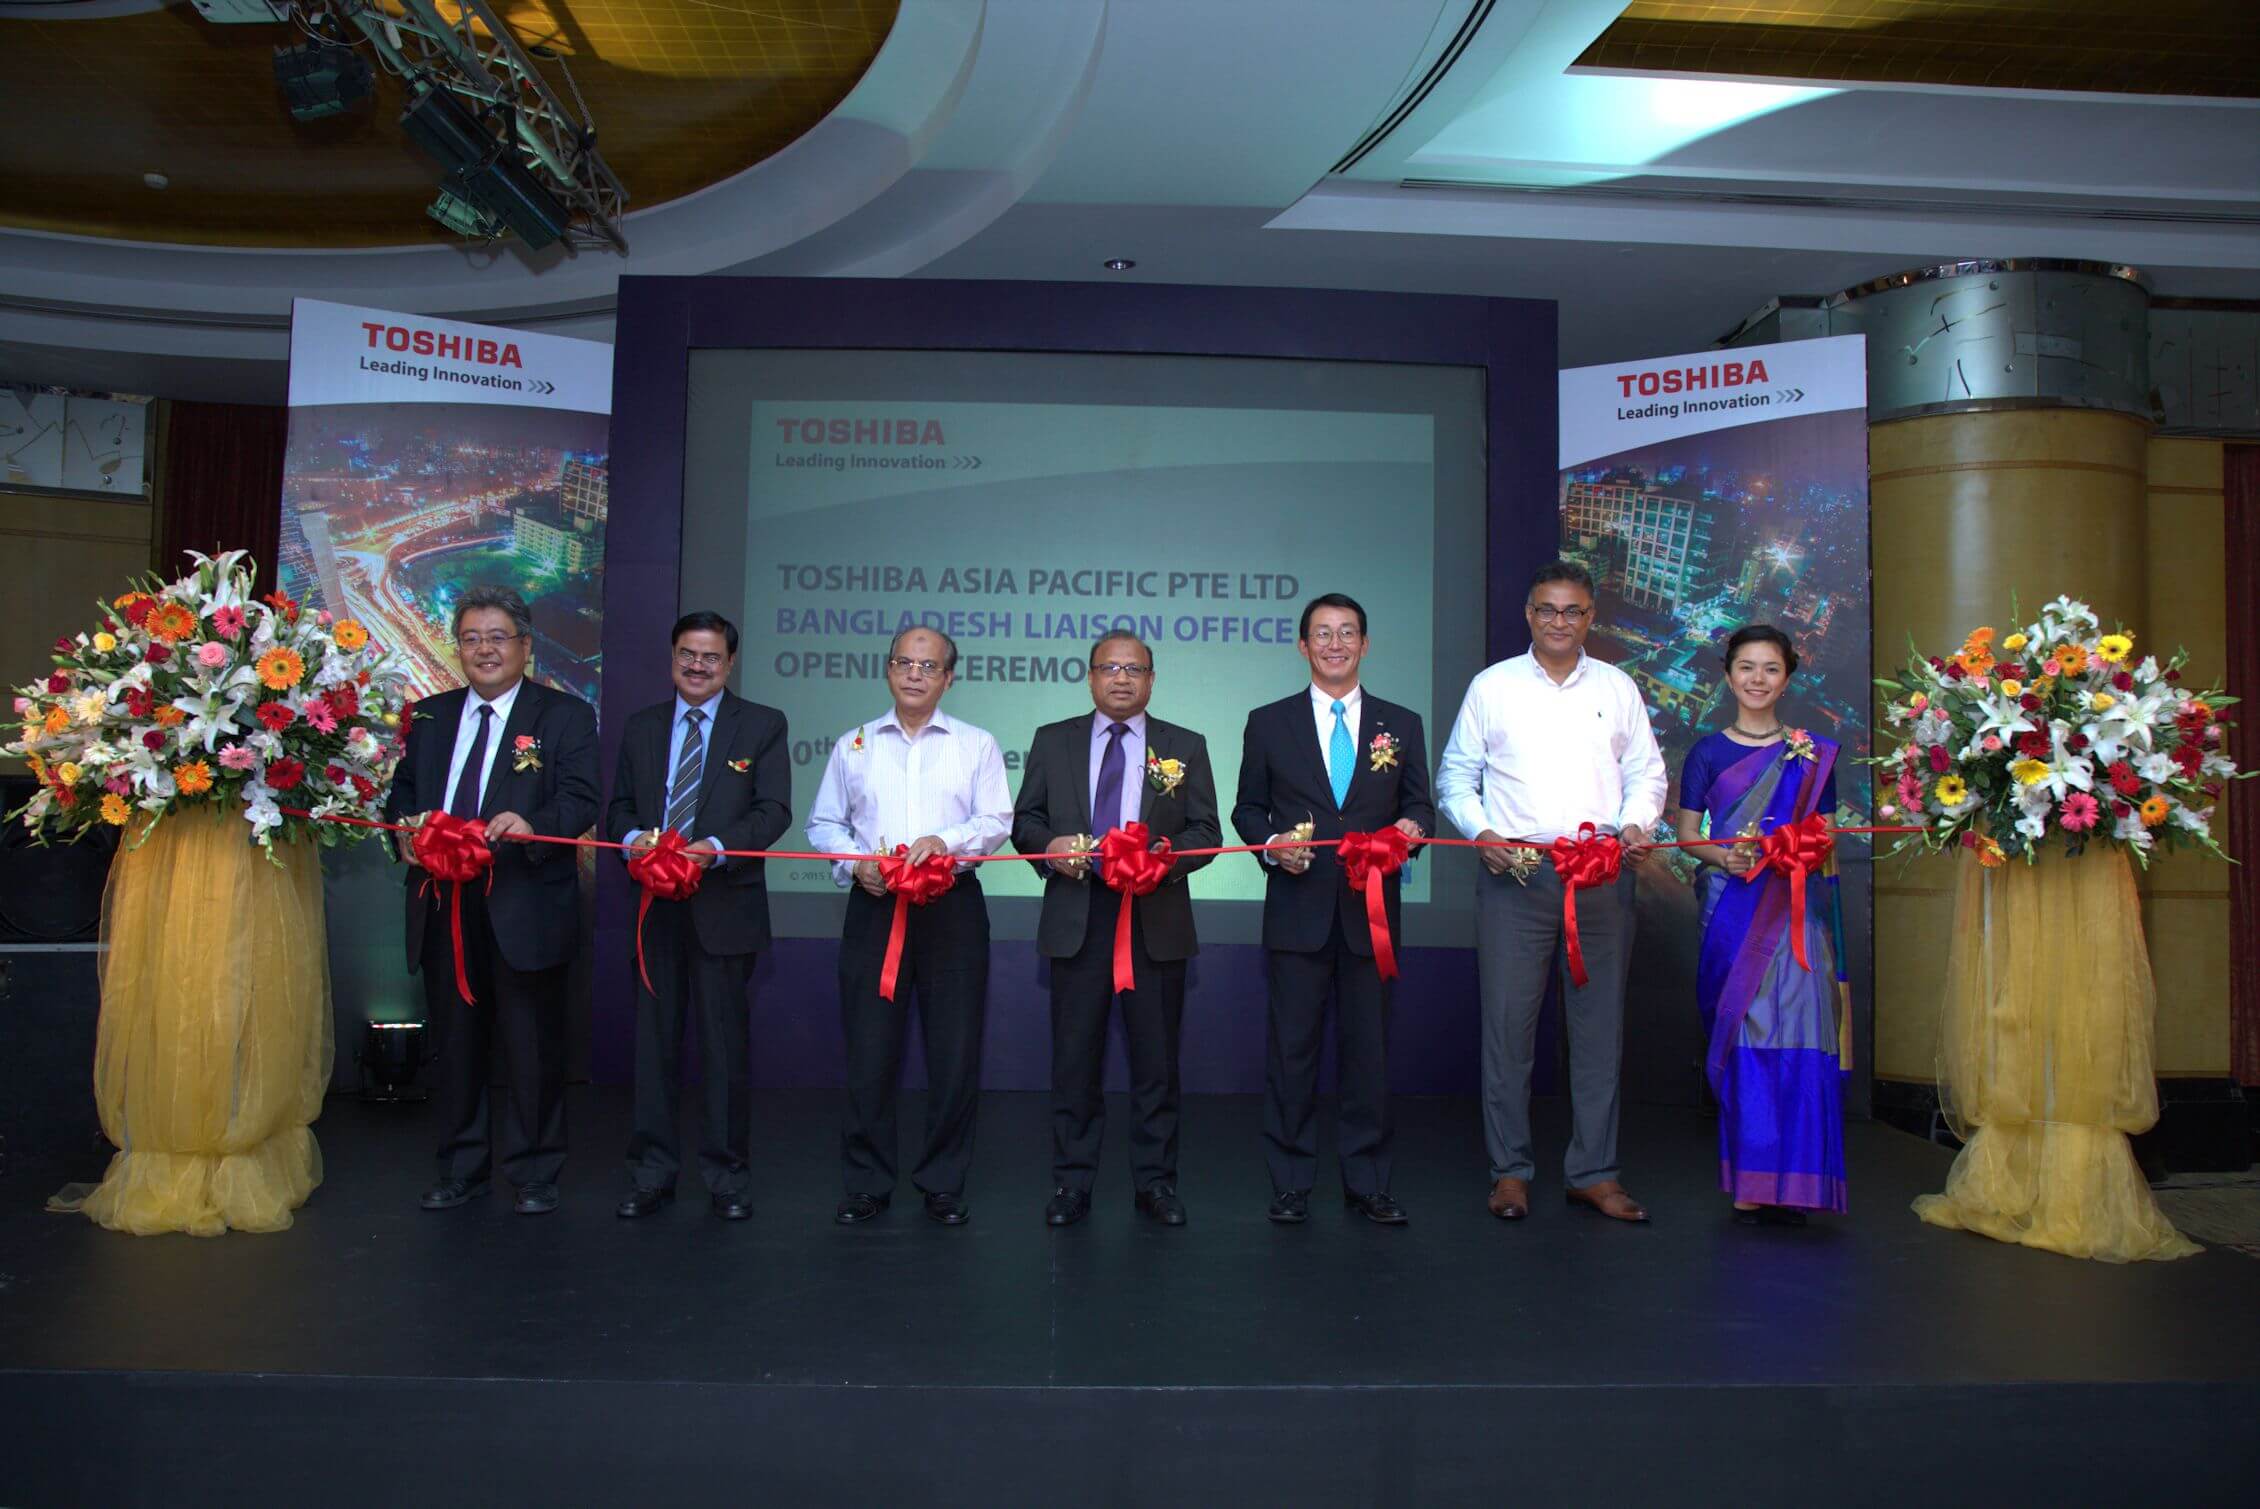 Toshiba Asia Pacific announced its commitment to Bangladesh's infrastructural development at the official opening of its Bangladesh liaison office. 